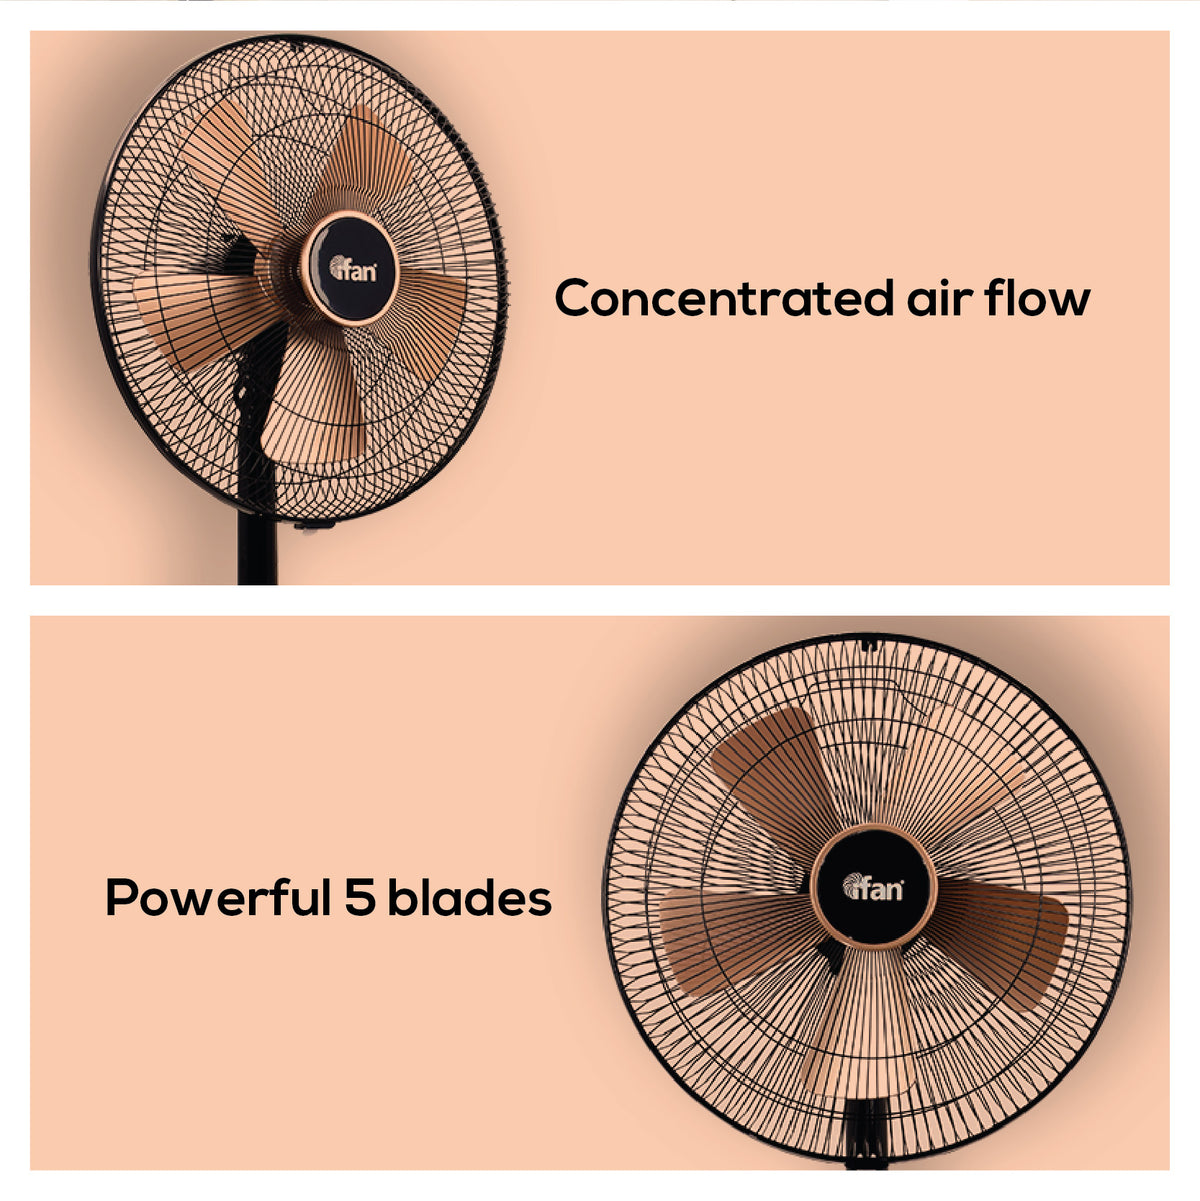 iFan Stand Fan 16&quot; with Air Circulator (IF401) - PowerPacSG